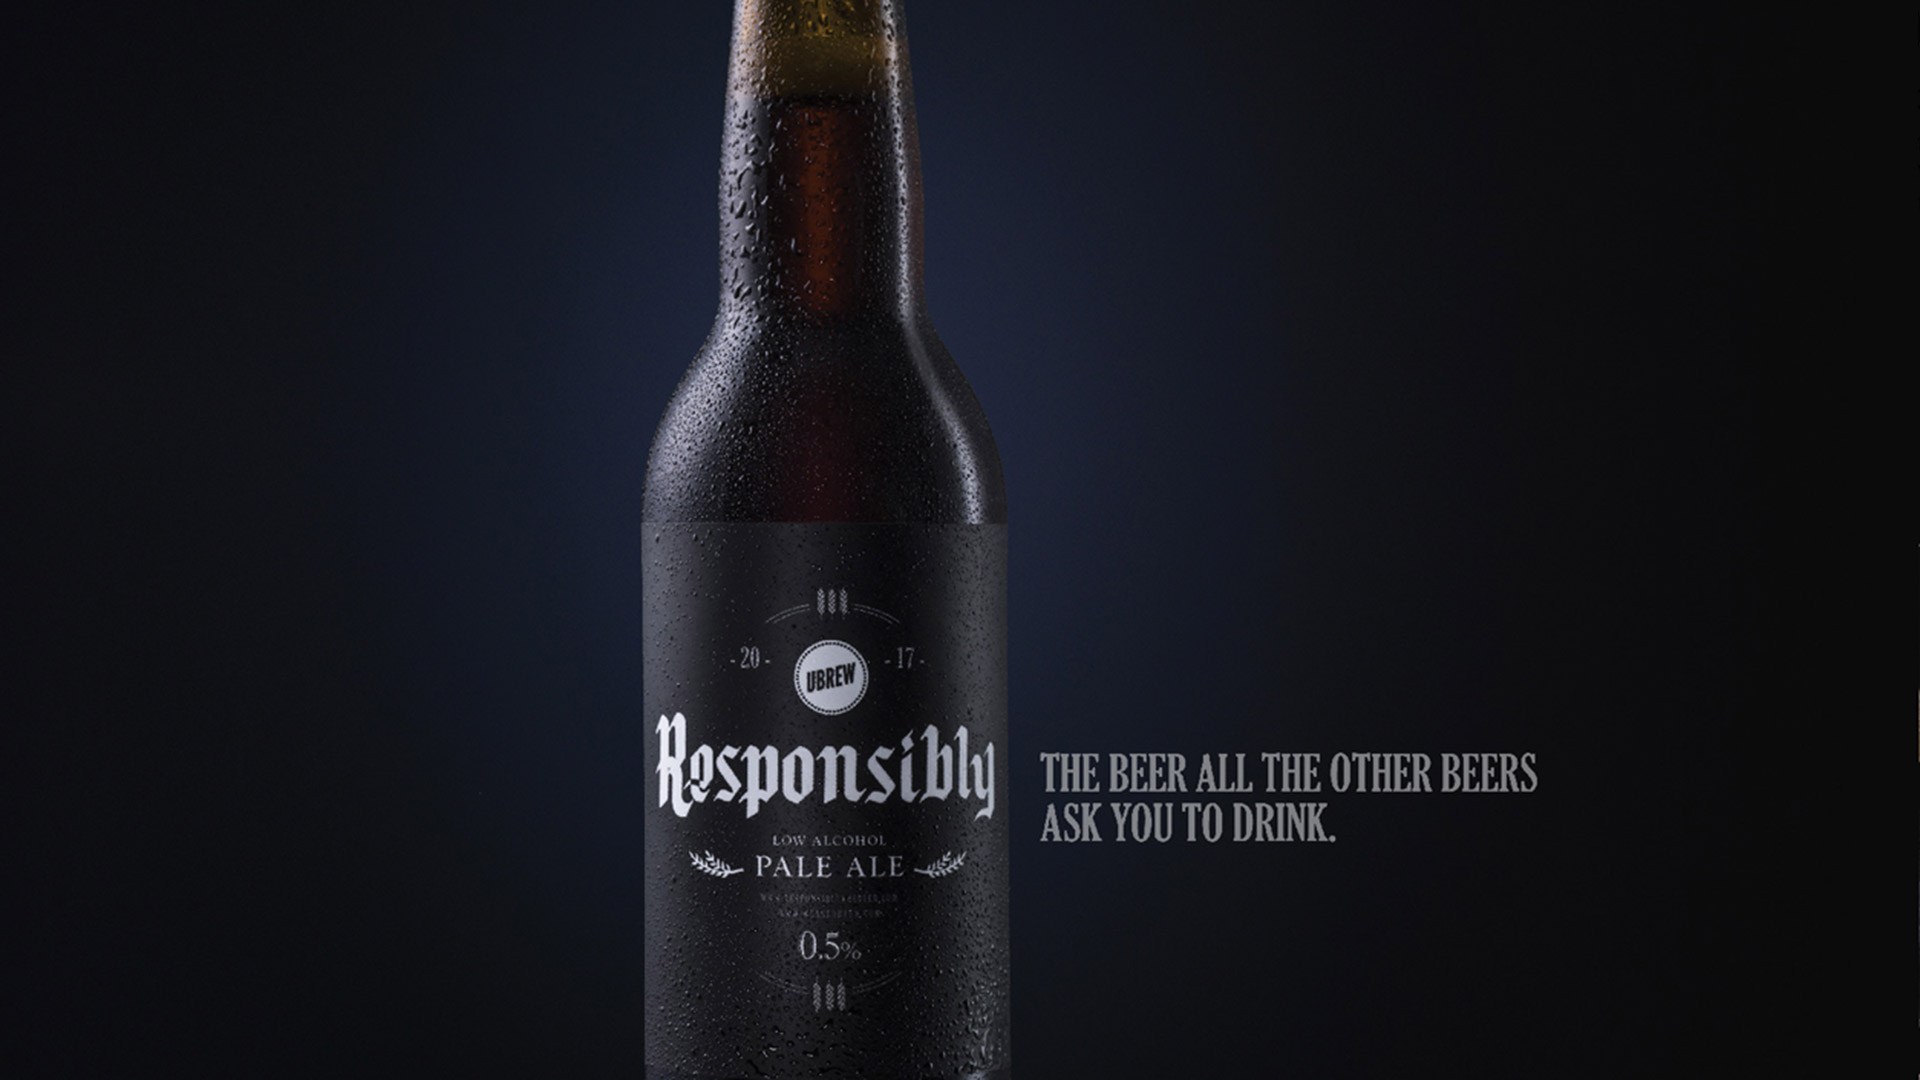 Responsibly the beer